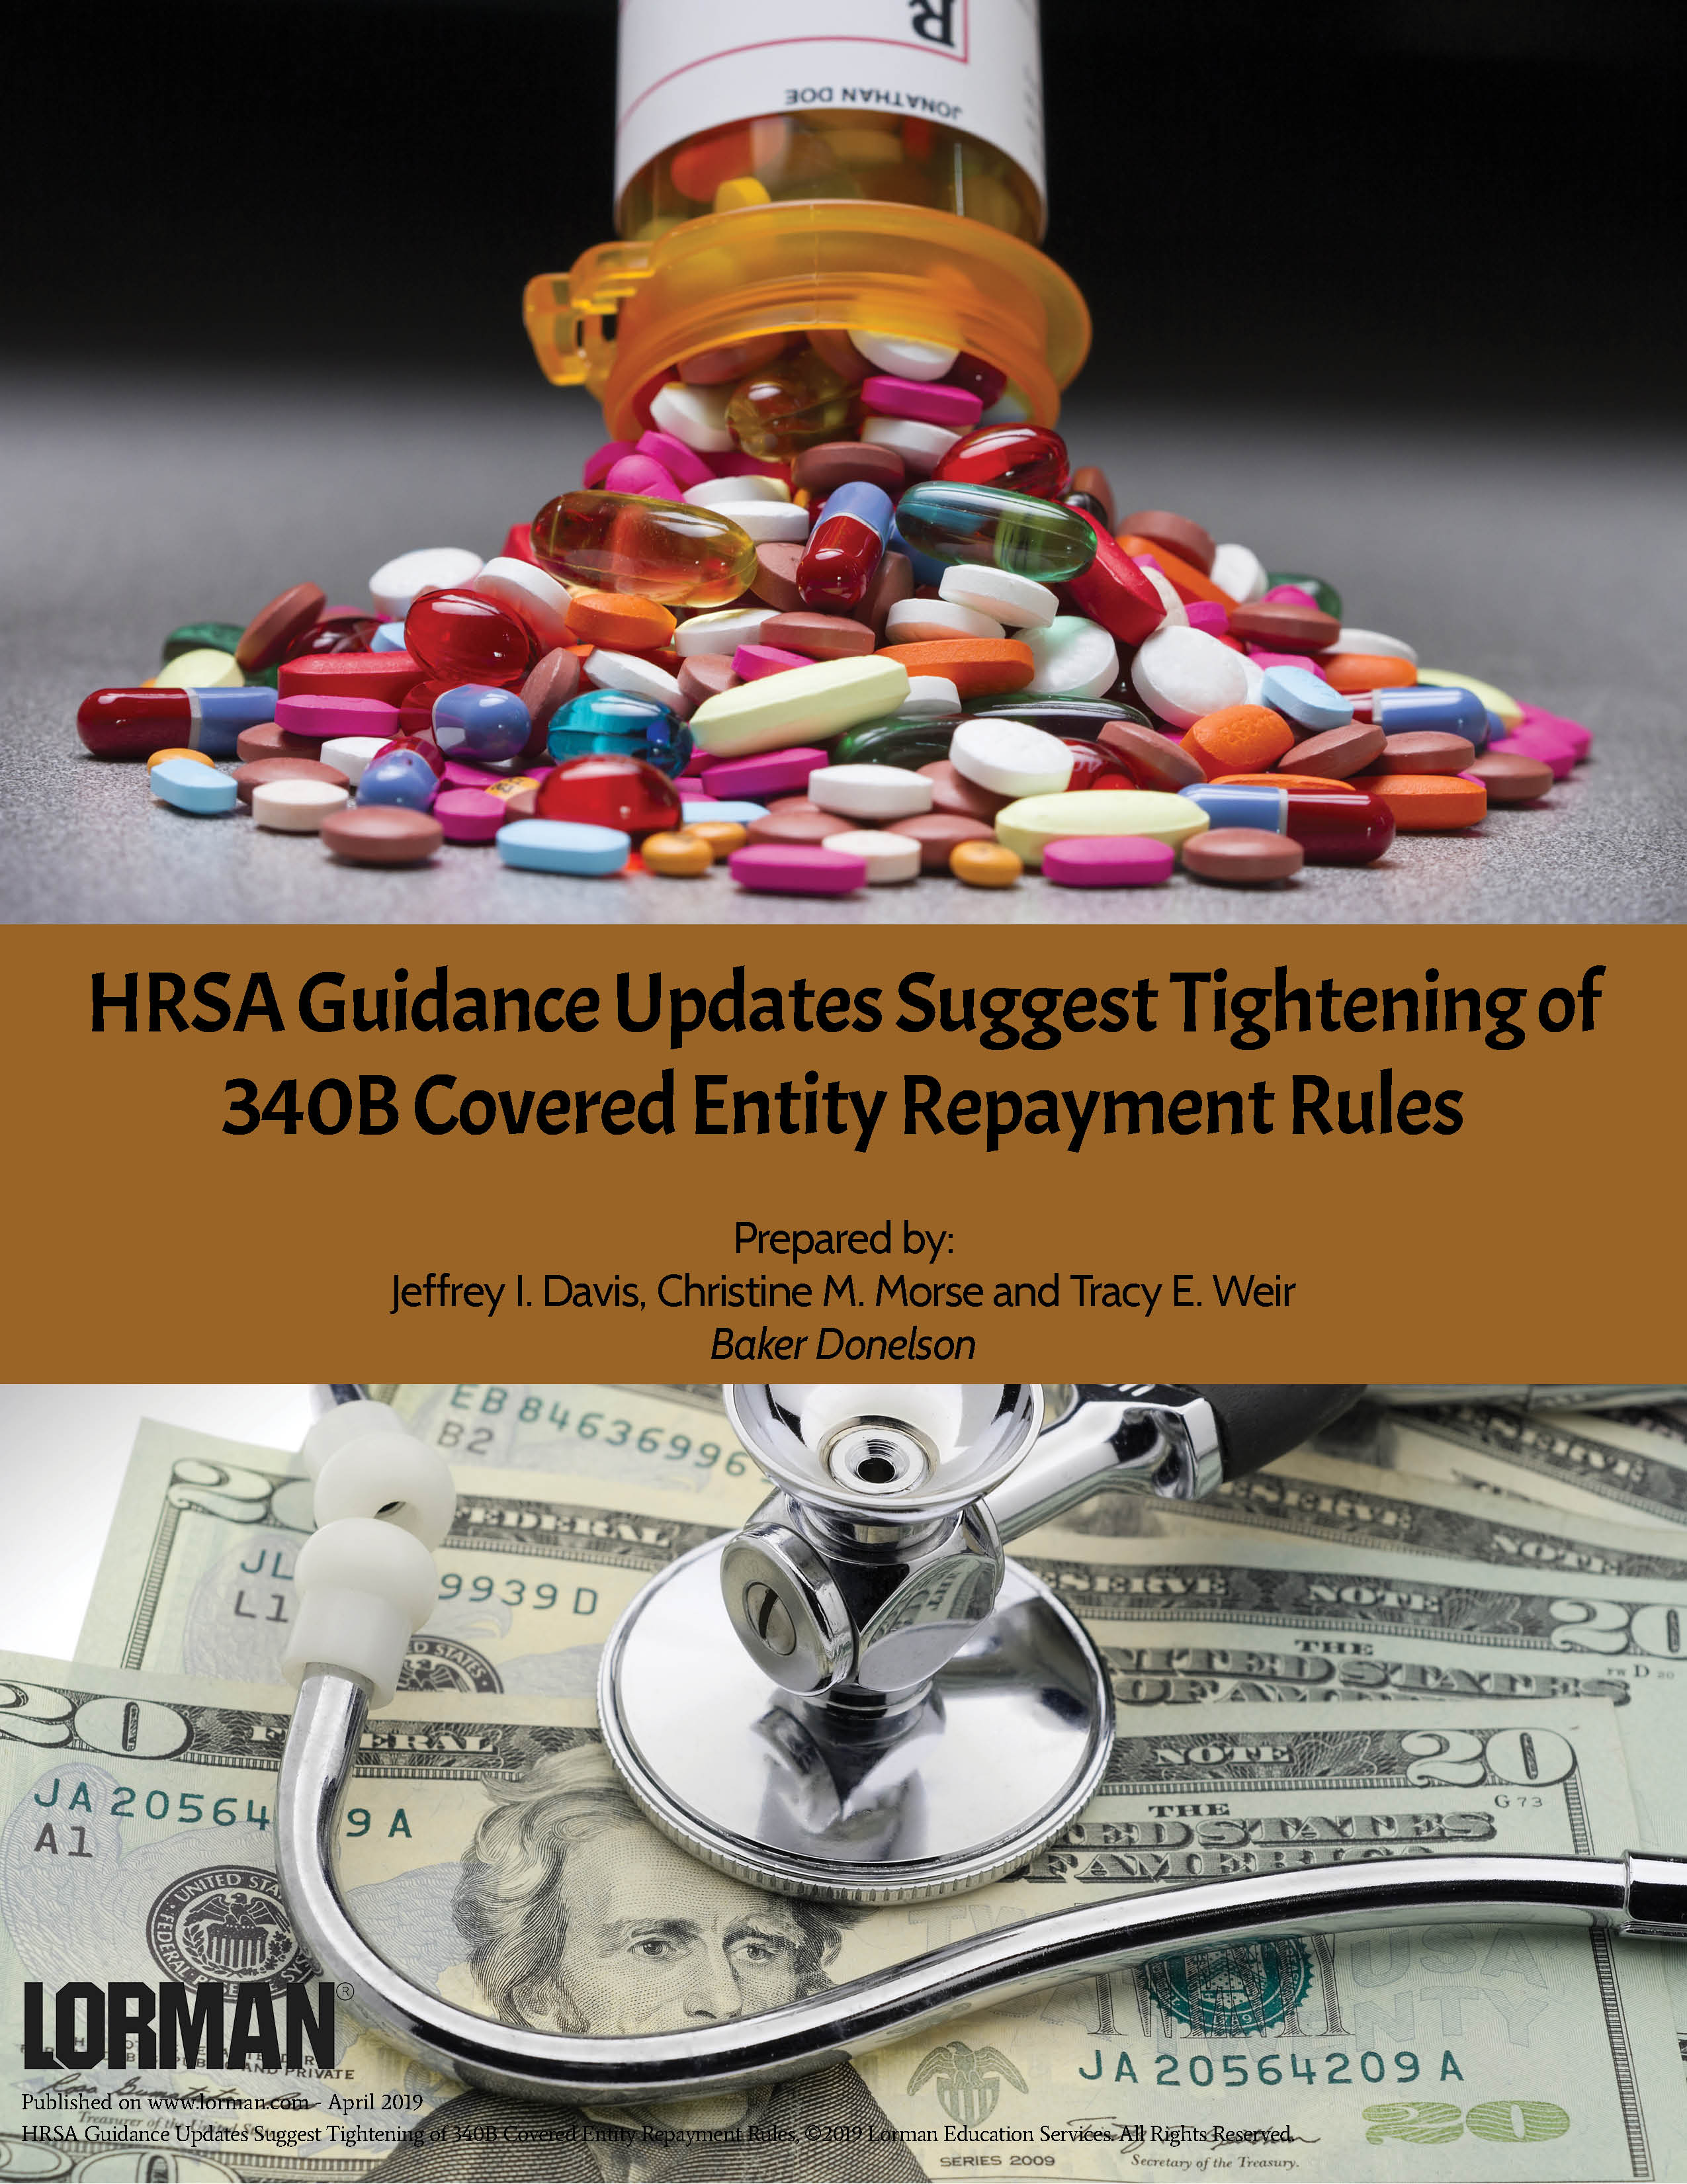 HRSA Guidance Updates Suggest Tightening of 340B Covered Entity Repayment Rules